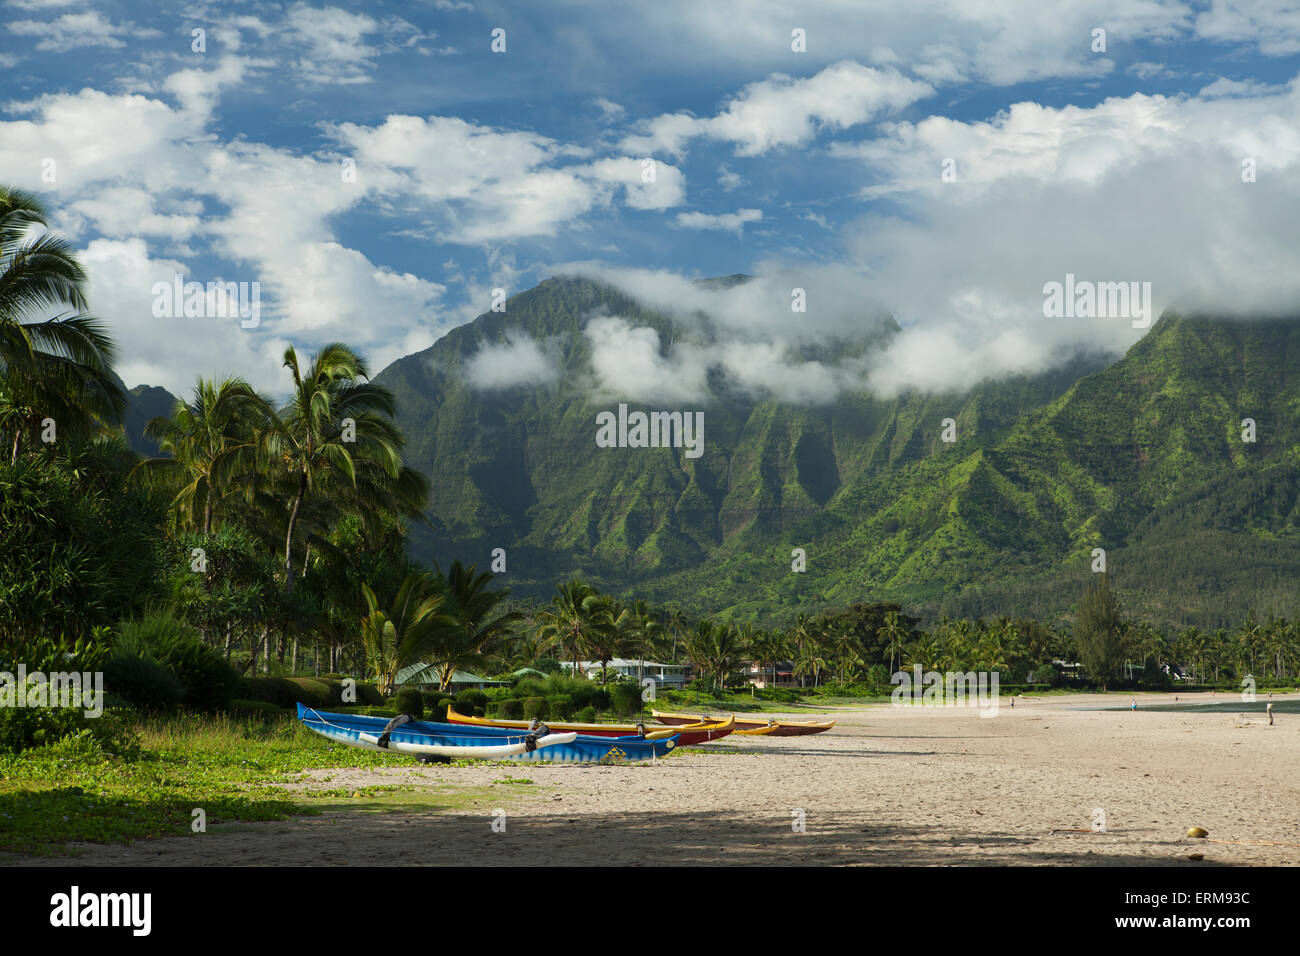 Outrigger canoes on Hanalei Beach, Bay and Valley; Hanalei, Kauai, Hawaii, United States of America Stock Photo